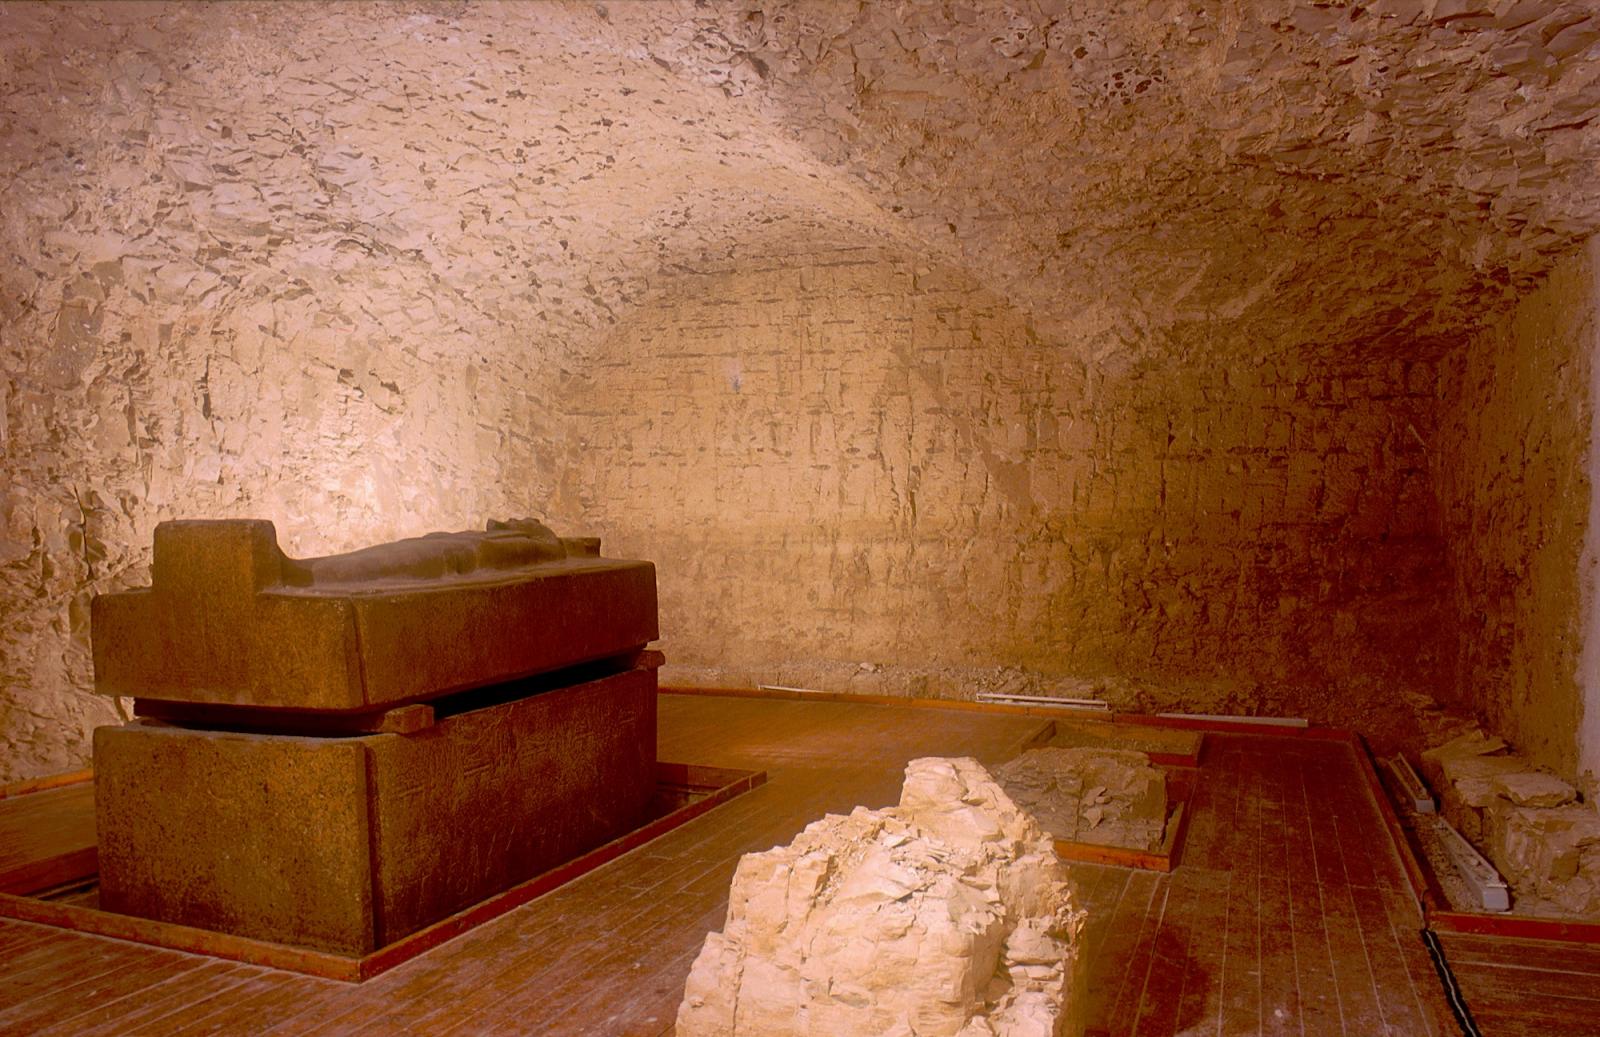 Sarcophagus in undecorated burial chamber with modern flooring.